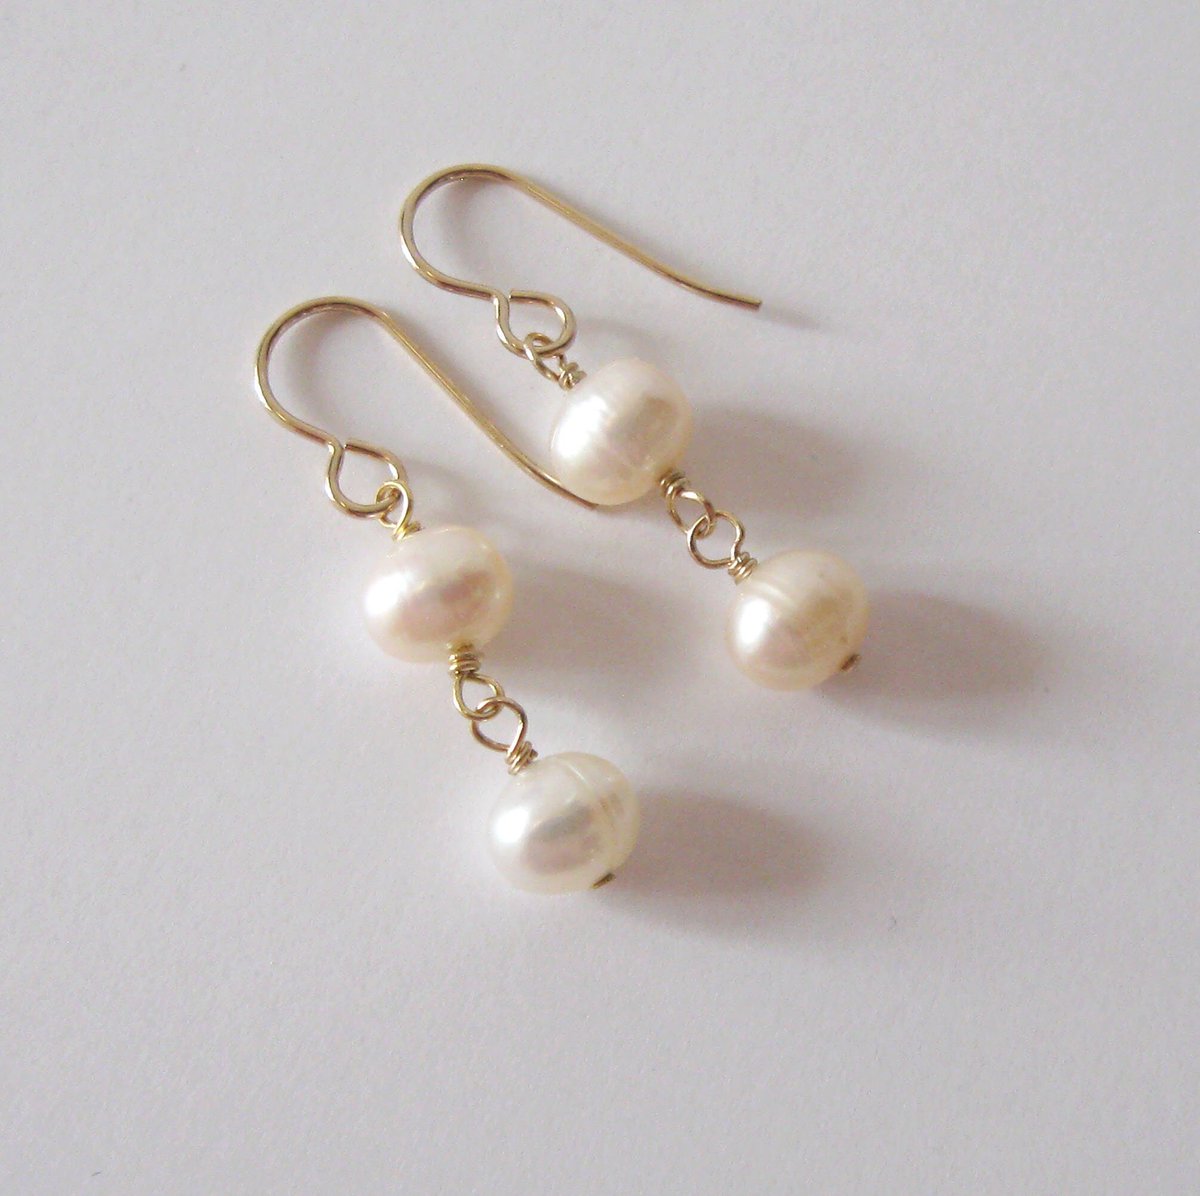 Cream Baroque Pearl Double Drop Goldfilled Earrings, Freshwater Pearls with Rings, Ear Wire Options tuppu.net/85e99c50 #Etsy #SendingLoveGallery #Sendinglovegallery